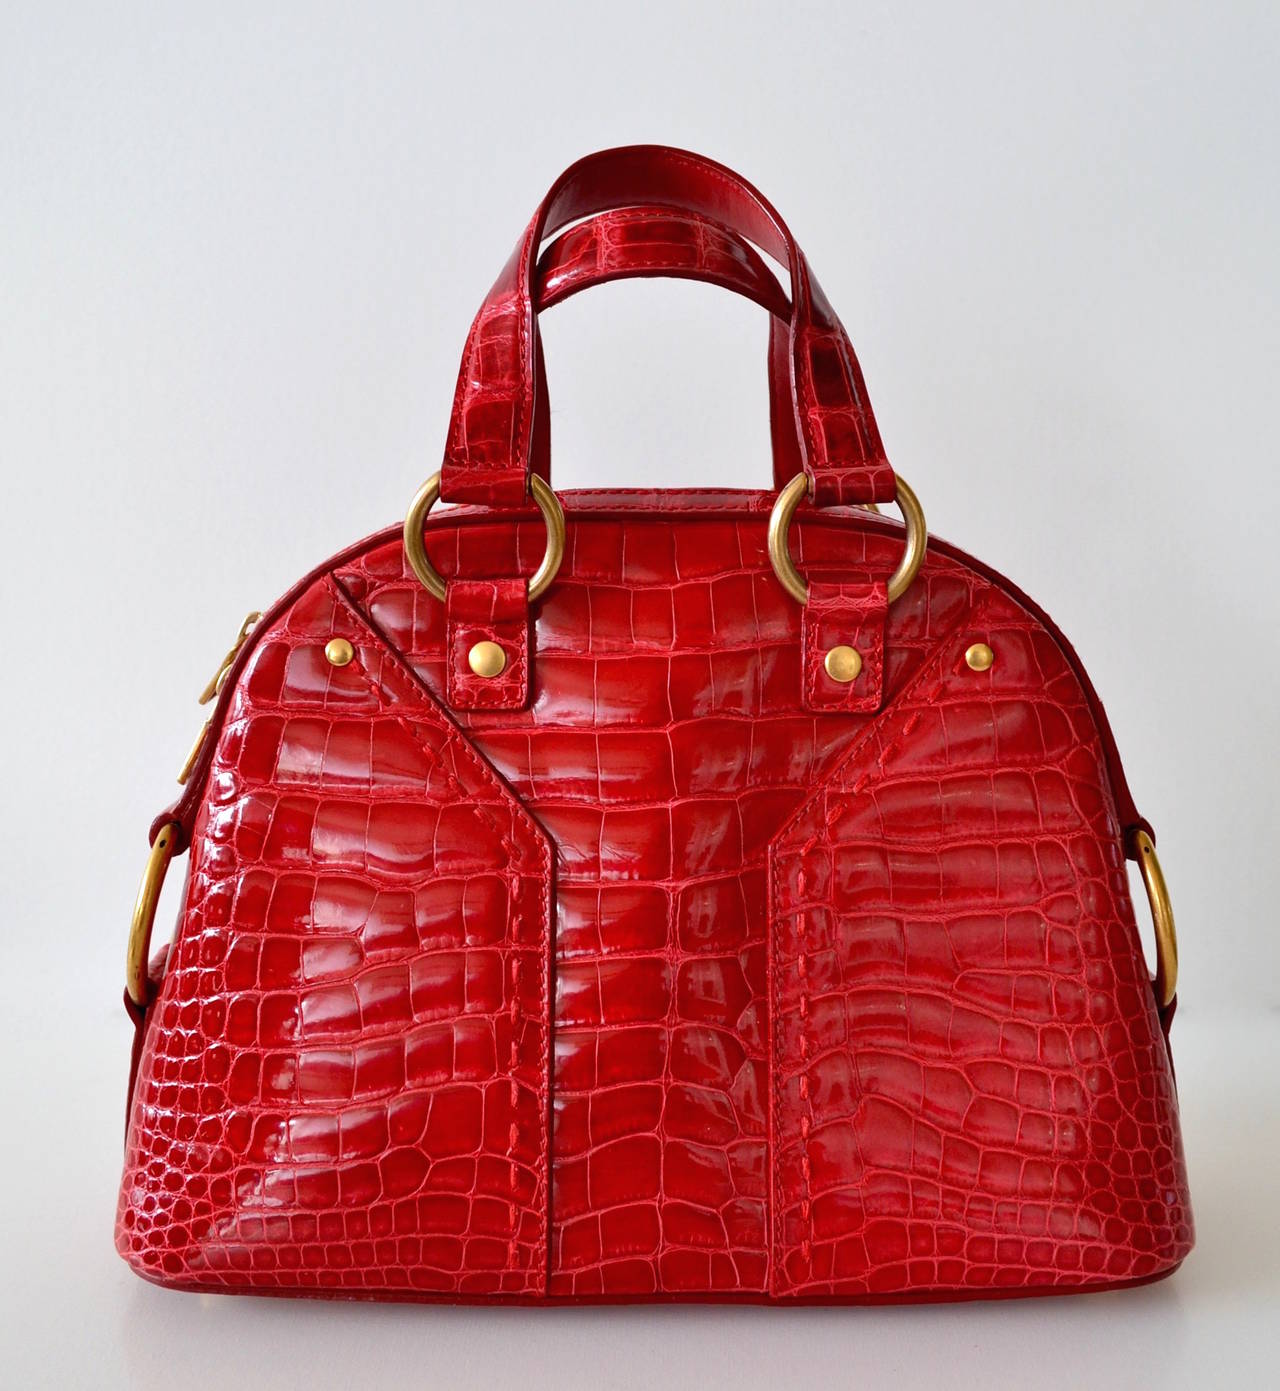 Yves Saint Laurent Muse 
Crocodile Alligator Red Cherry
Gold brass hardware 
Excellent condition  8/10
 
Leather lining
Zipper closure
 
Yves Saint Laurent Rive Gauche label
Serial number stamped on lining
 
Dimensions : 27 X 20 X 10